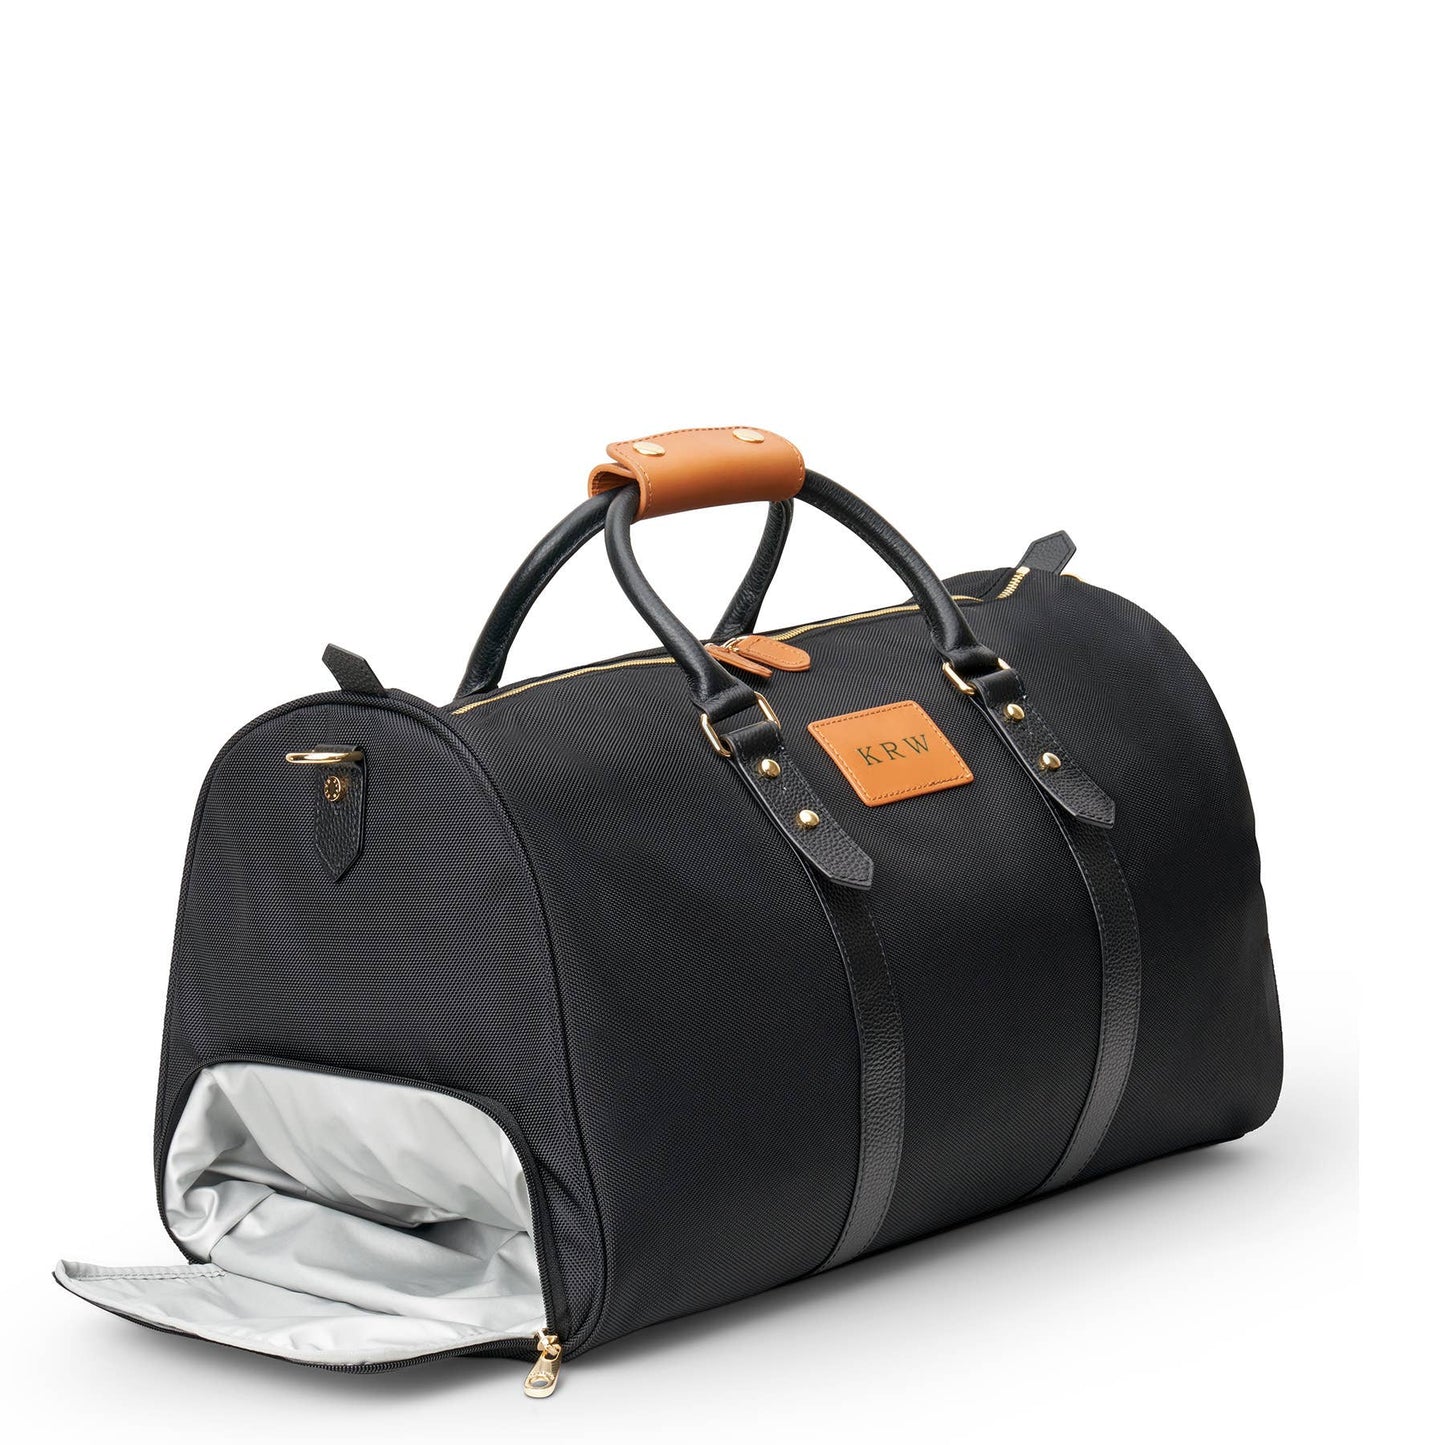 "Alex" Black Nylon and Leather Duffle Bag (Personalizable)